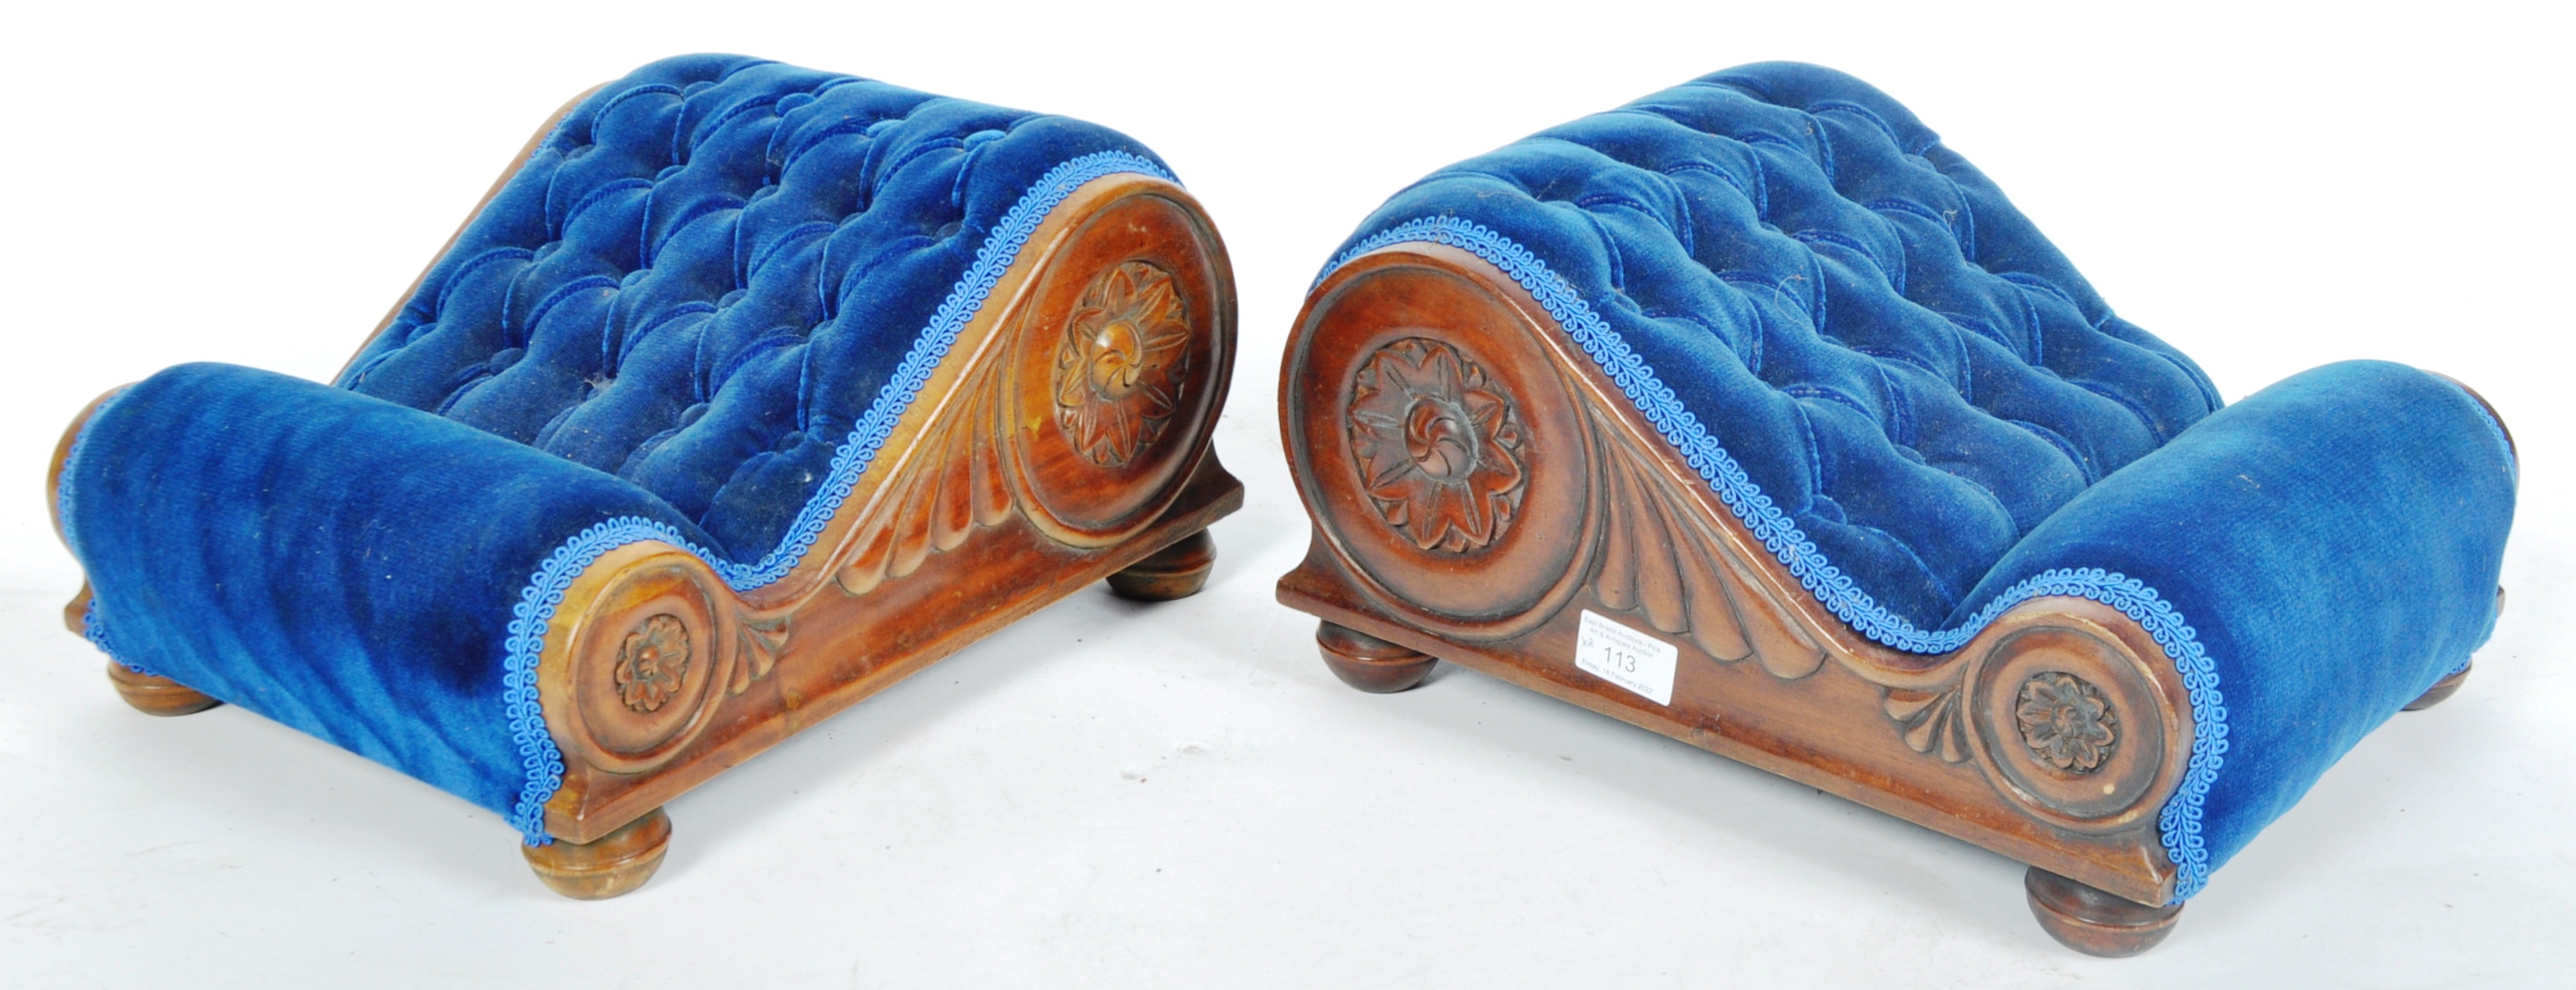 MATCHING PAIR OF VICTORIAN MAHOGANY AND BLUE VELVET GOUT STOOLS - Image 7 of 7